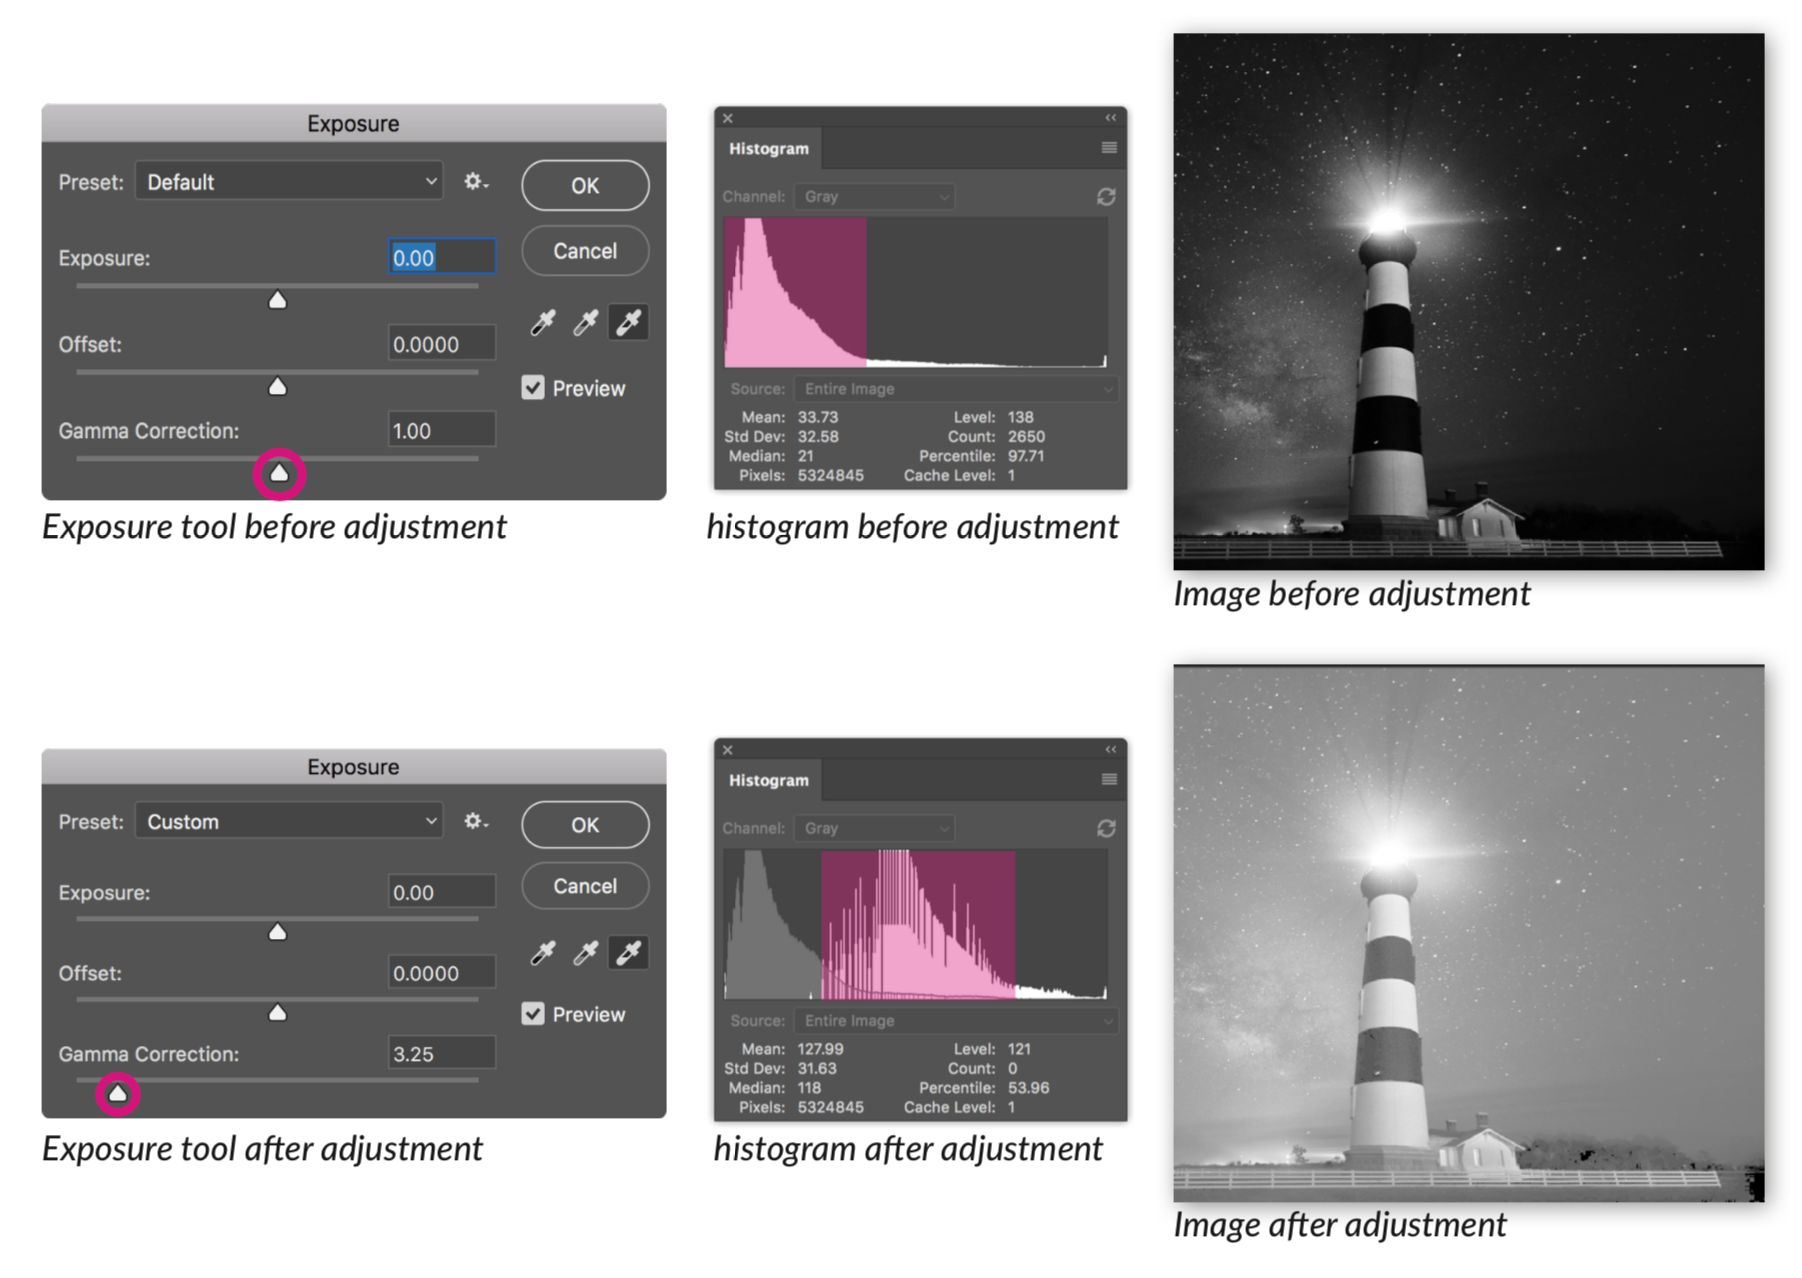 Images and histograms before and after adjustment